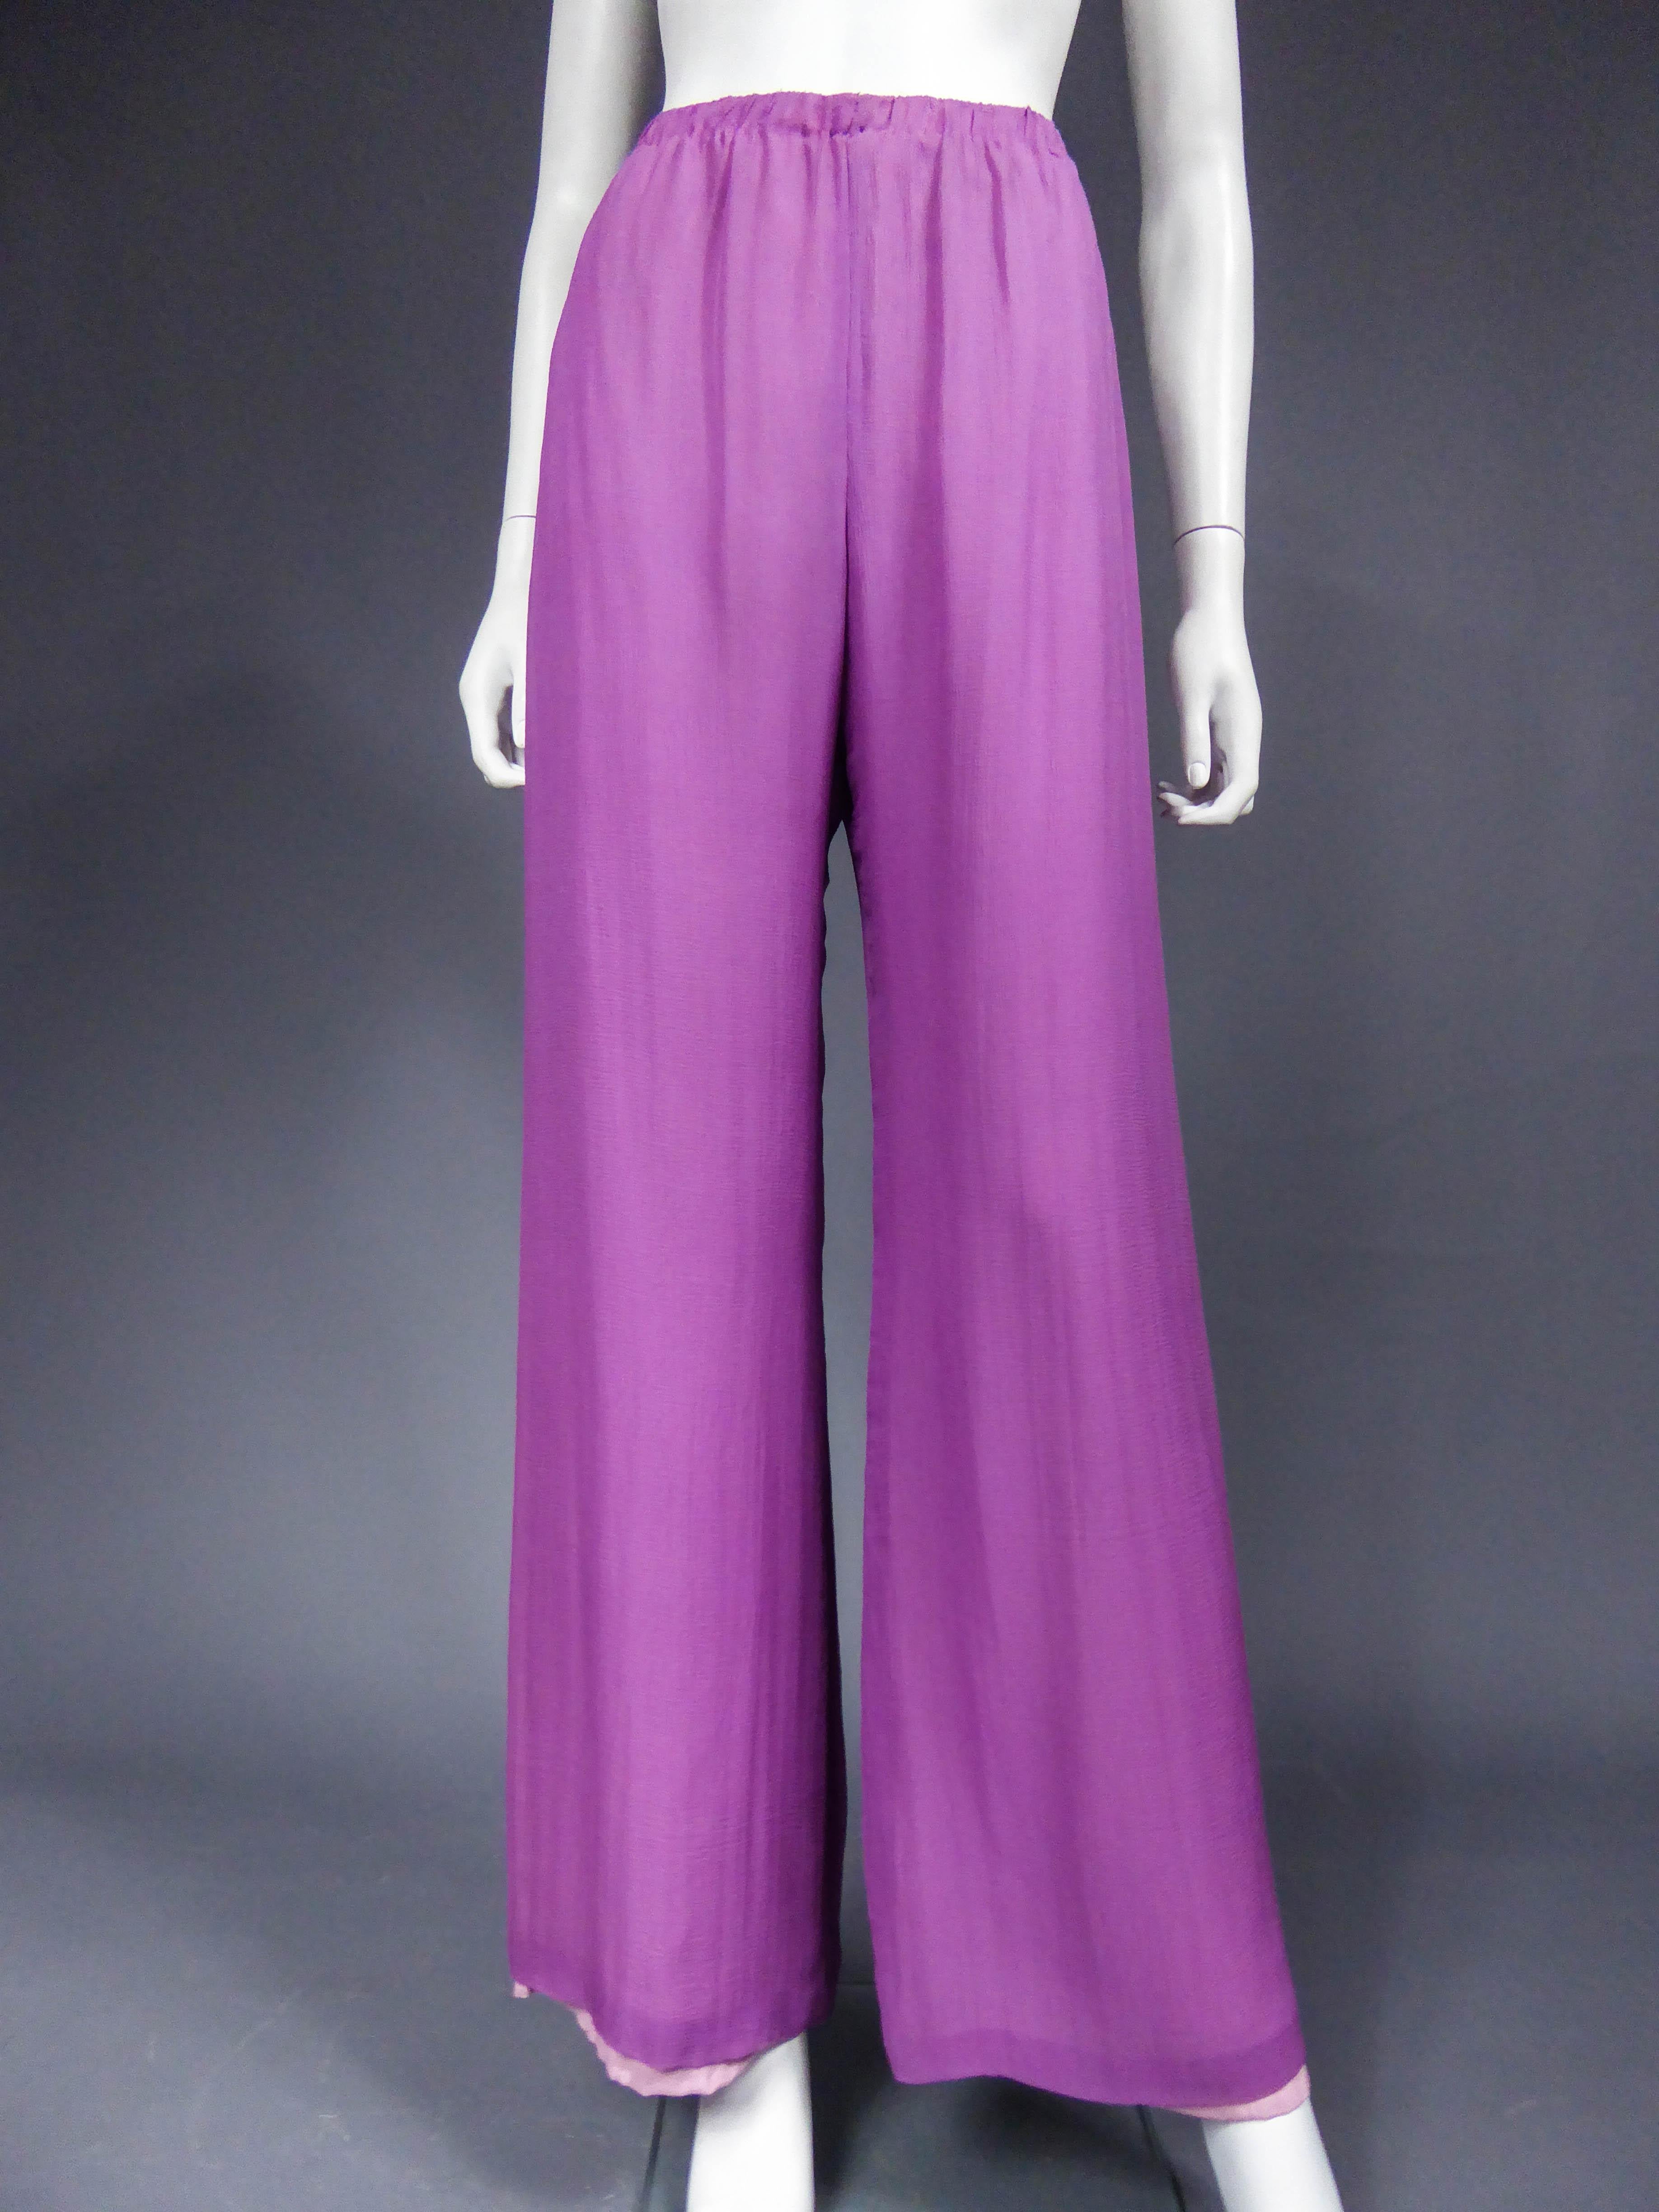 Circa 1970
France Europe

Amazing psychedelic pajamas set dating back to the 1970s without label. High waist dress and pants in purple silk crepe embroidered with pearls. Closure of the dress in front at the level of the embroidery by hooks.